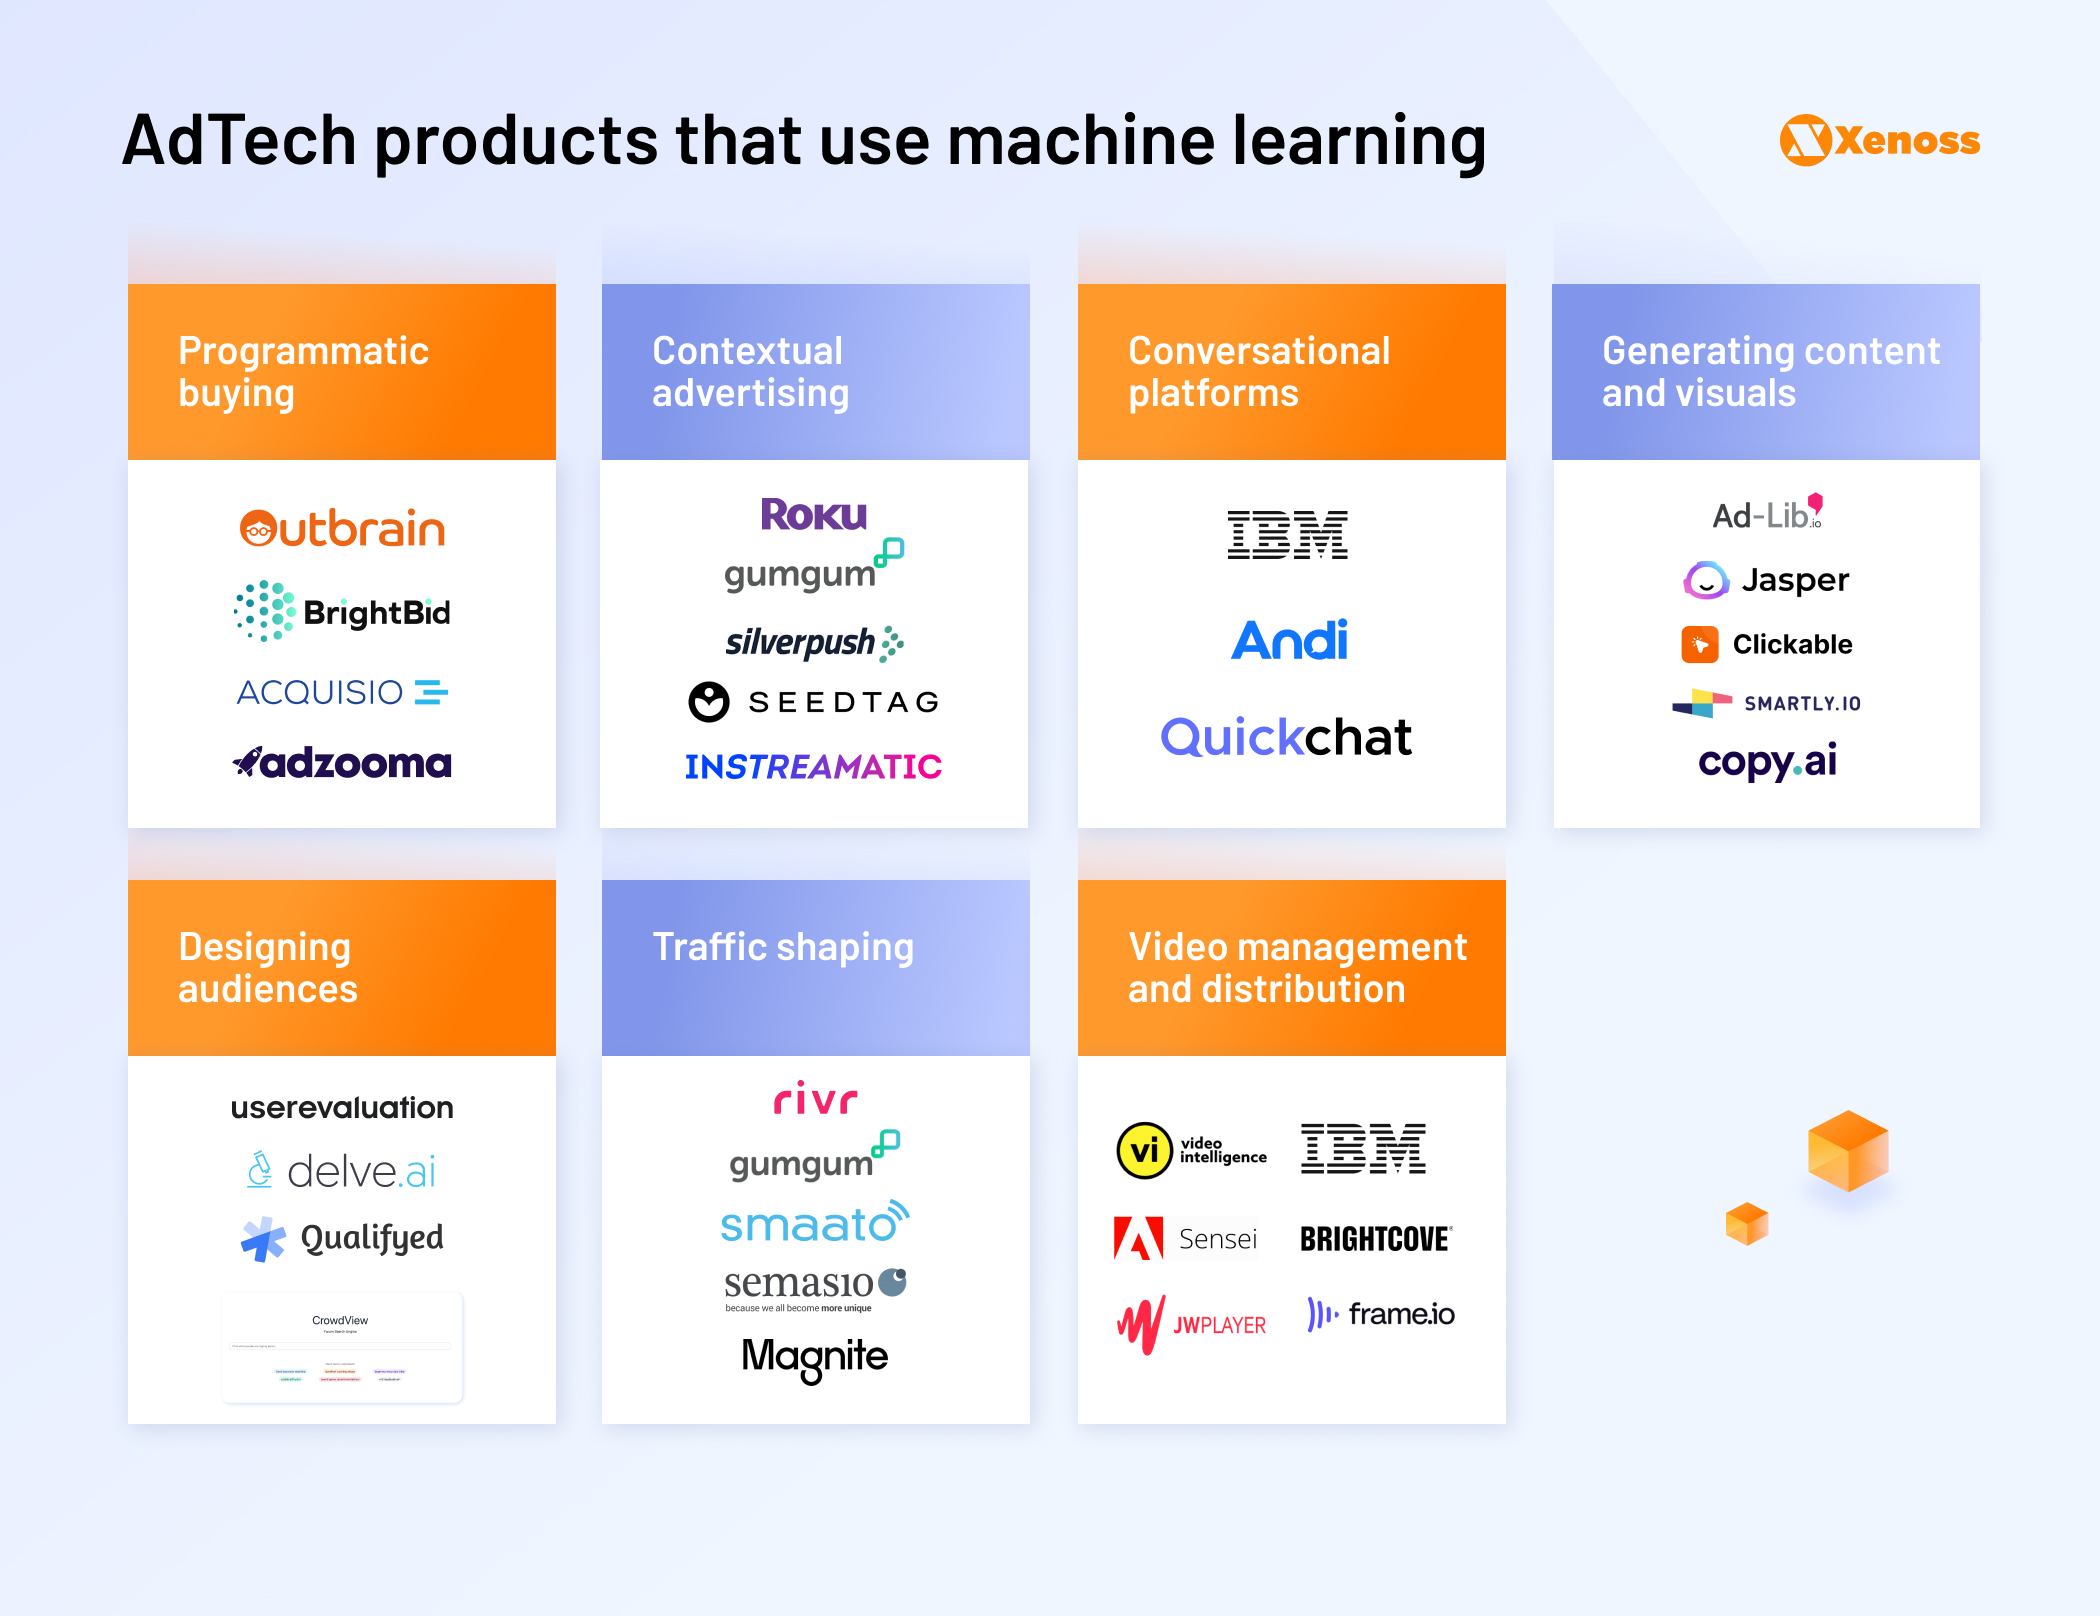 Graph showing leading AdTech companies with machine learning use cases